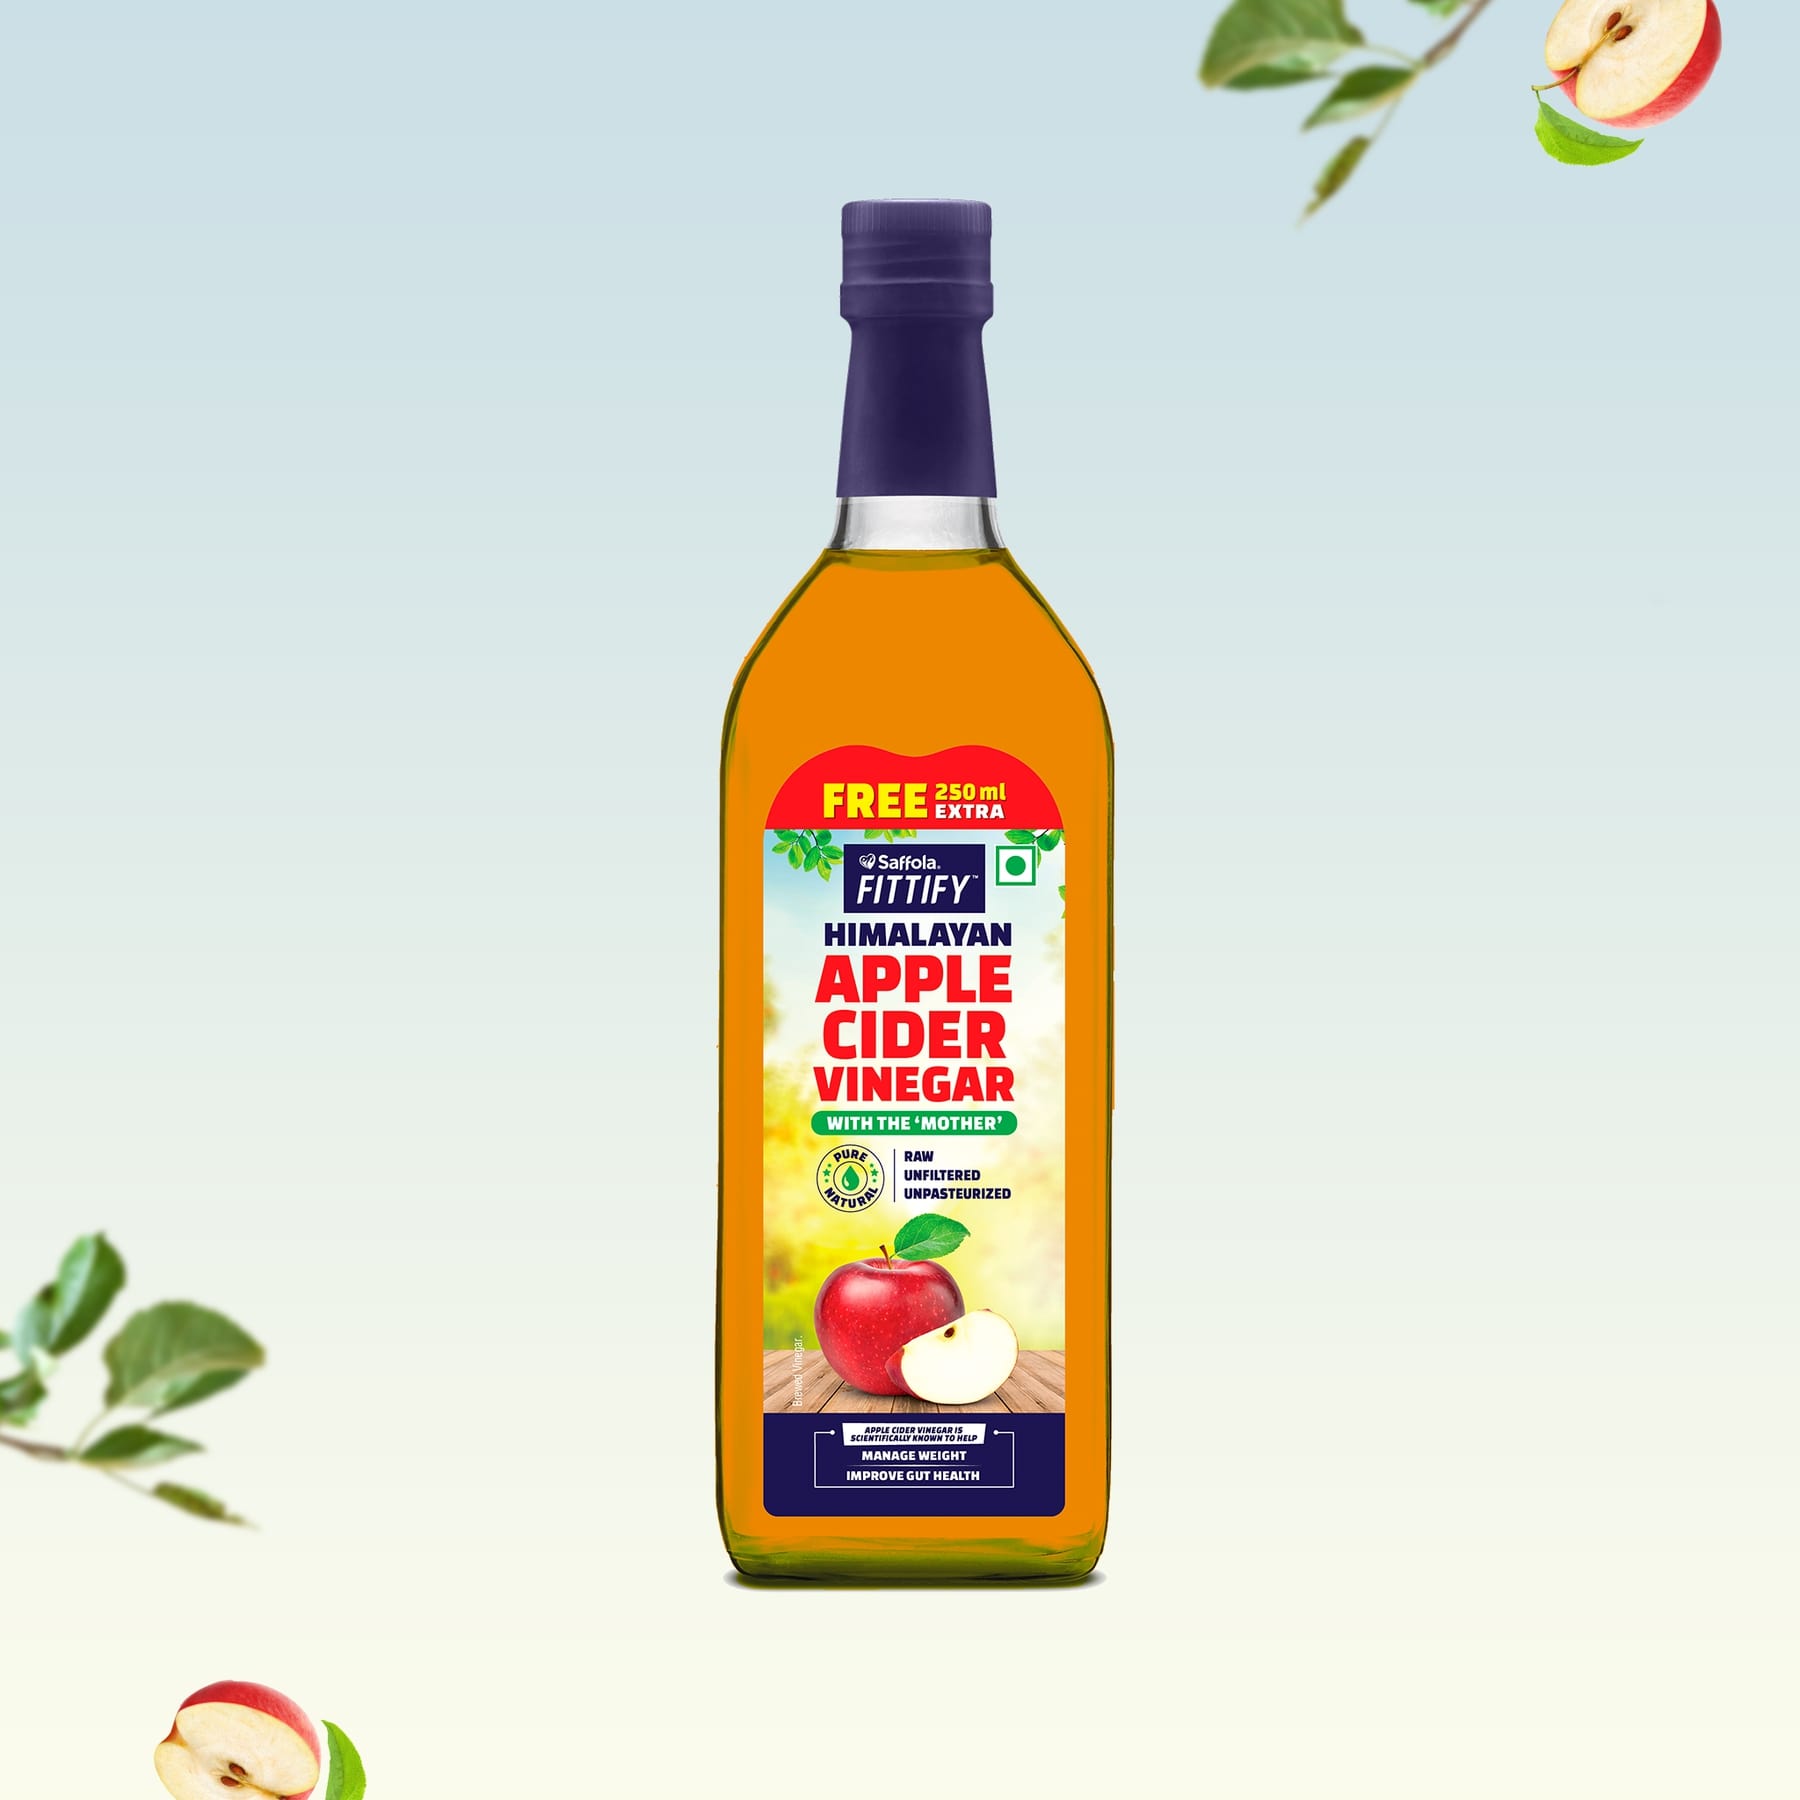 [SALE] Saffola Fittify Apple Cider Vinegar with The Mother -1000ml